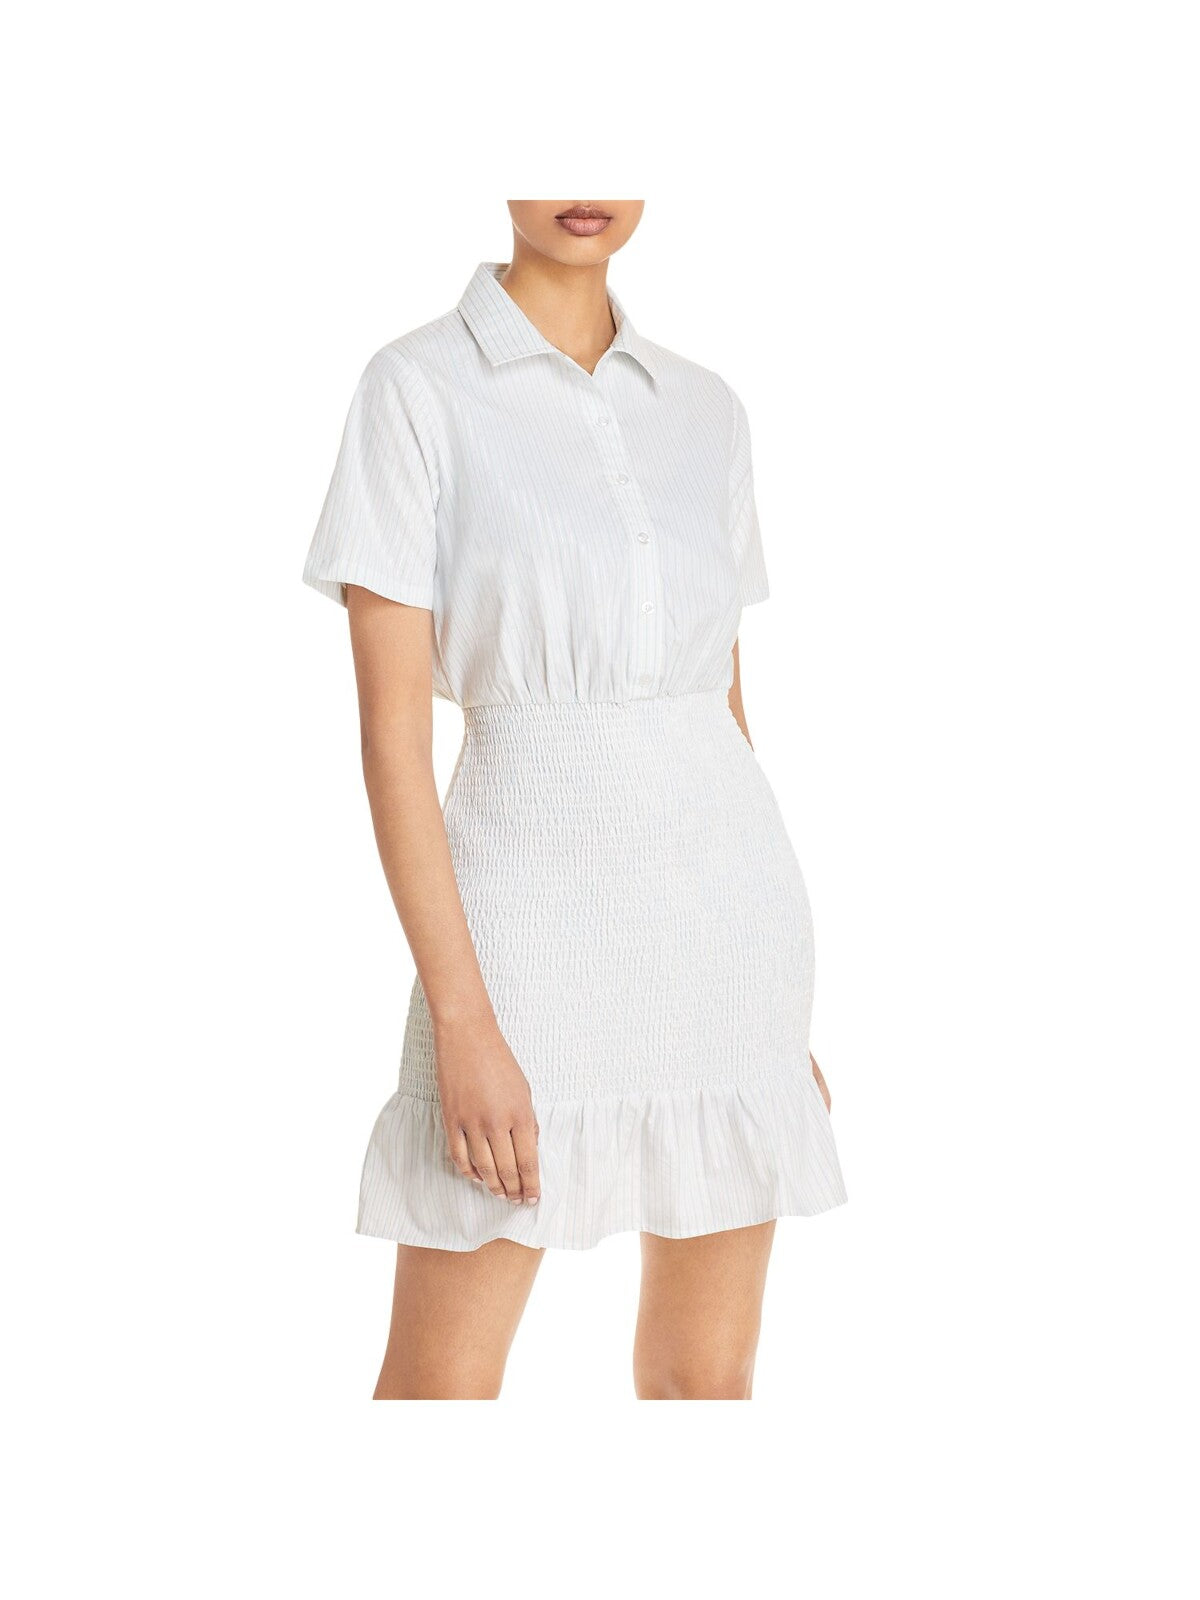 AQUA Womens White Stretch Ruffled Button Front Smocked Skirt Striped Short Sleeve Collared Short Party Shirt Dress M